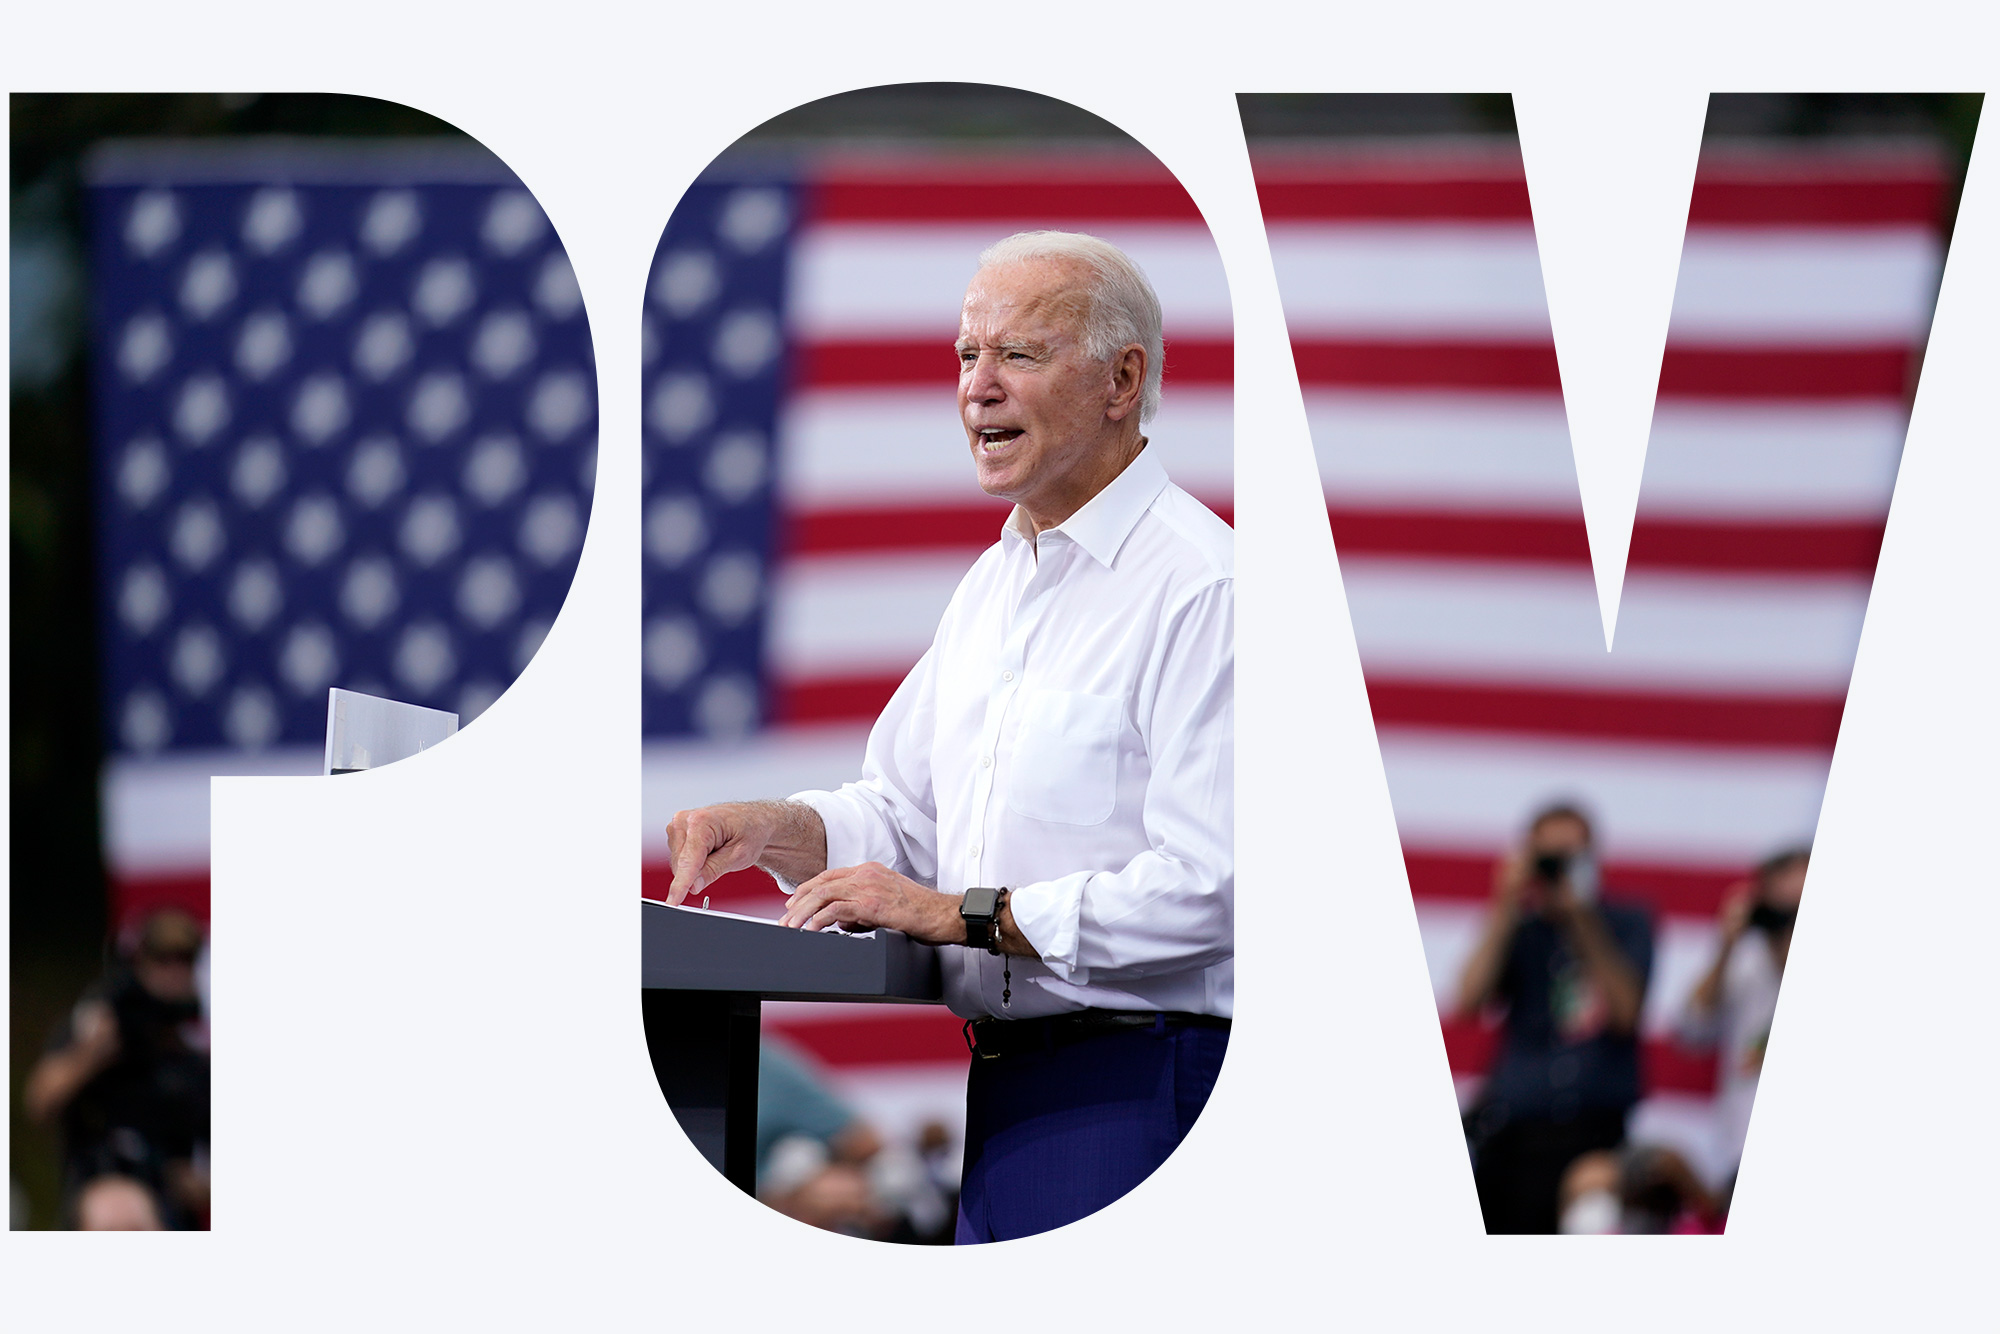 A photograph of Joe Biden giving a campaign speech at a podium with an American flag in the background. A white text overlay reads "POV."